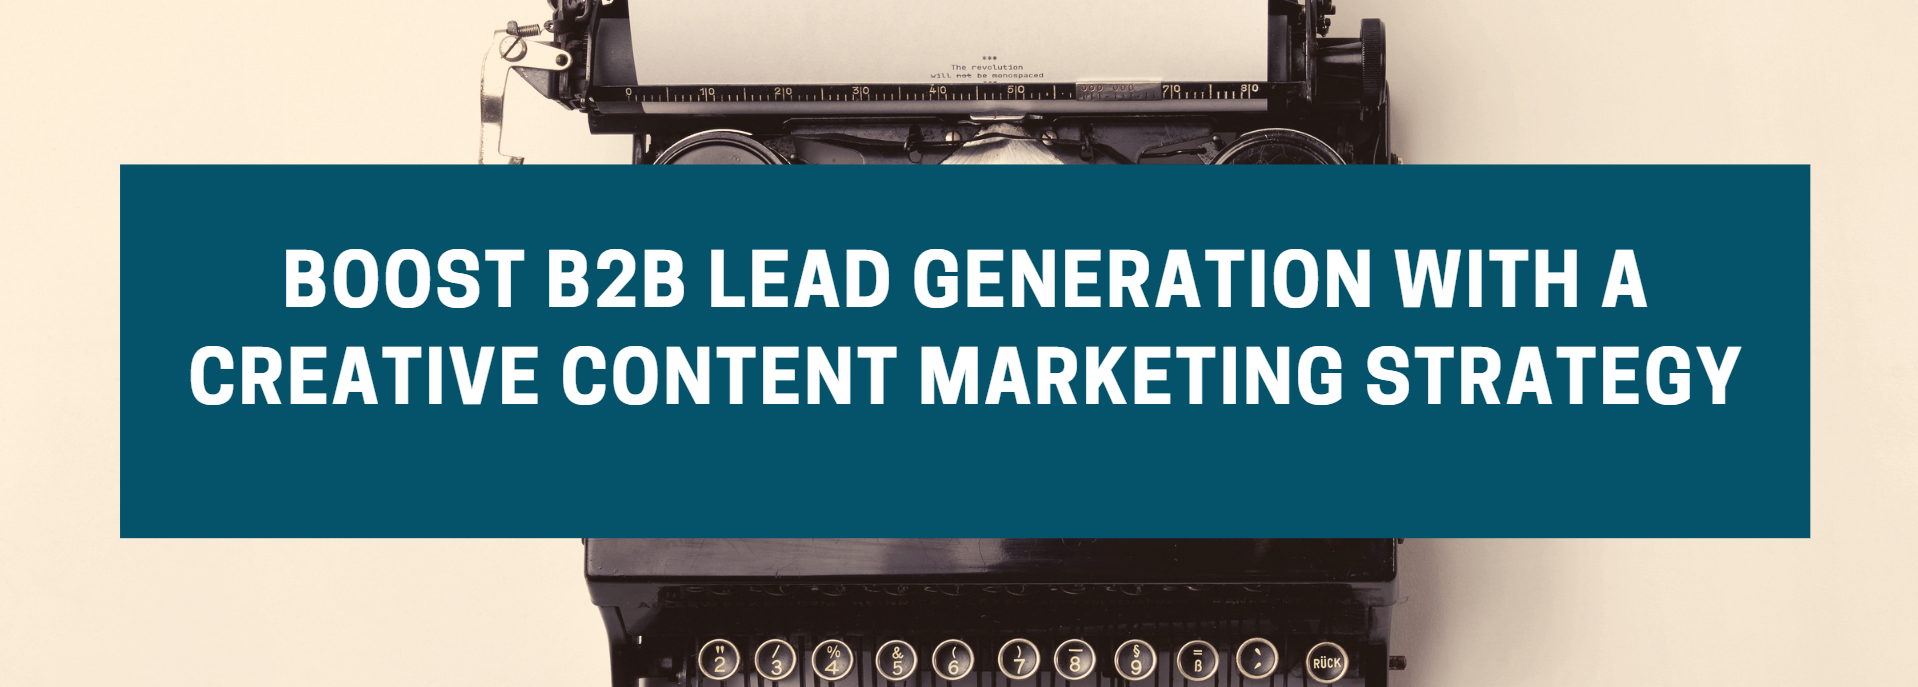 Boost B2B lead generation with a creative content marketing strategy